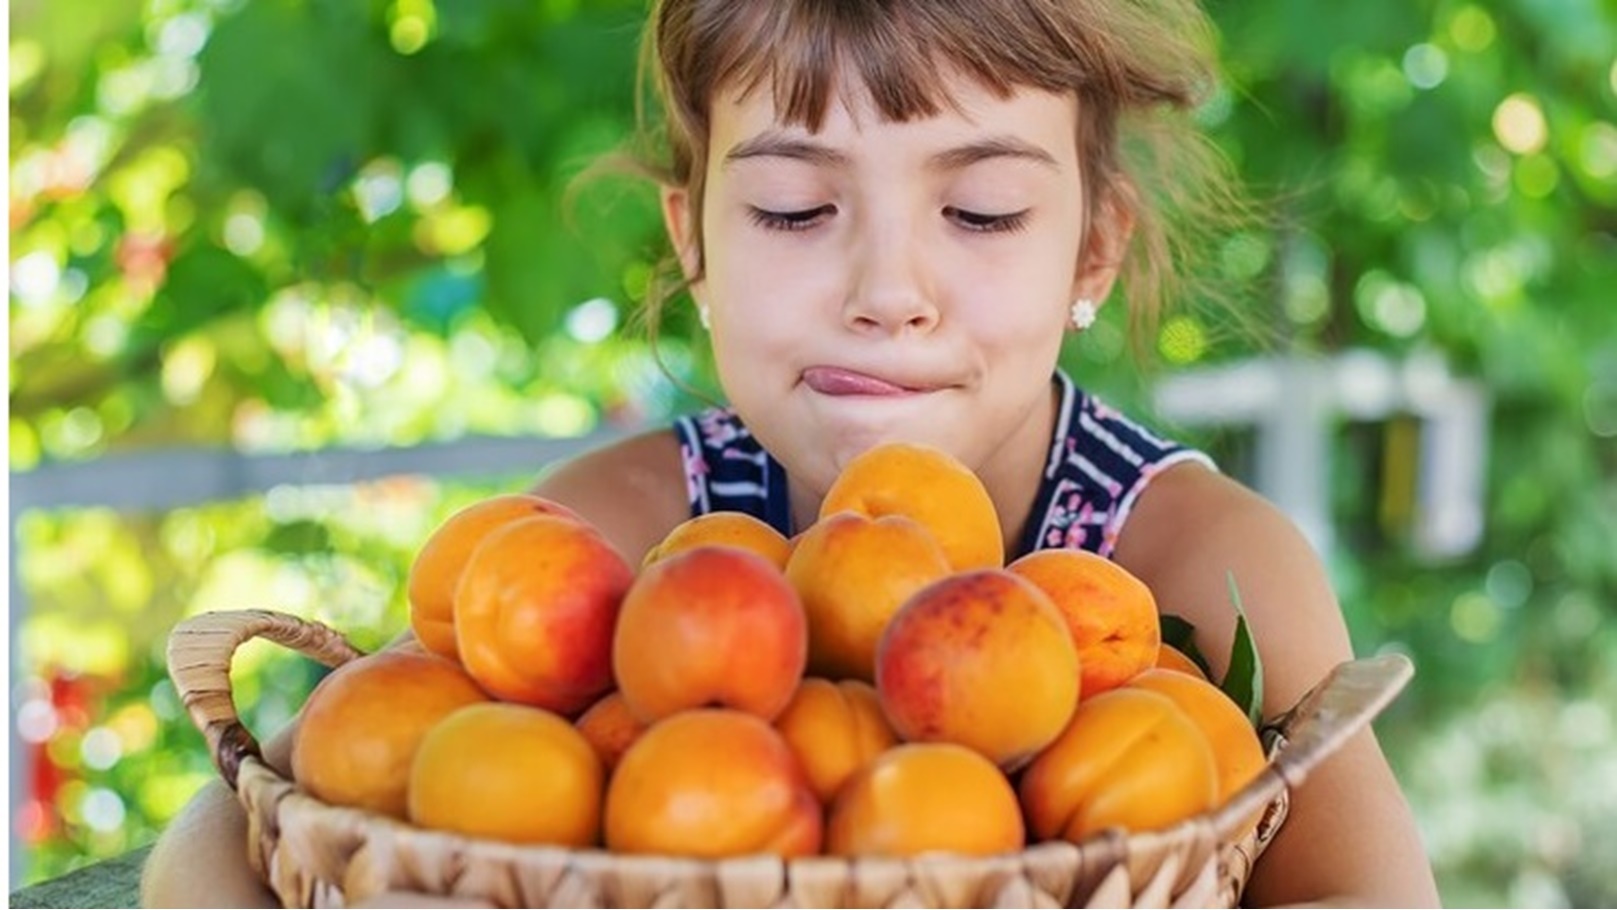 child-with-apricots-gardener-harvest-selective-focus_73944-14511